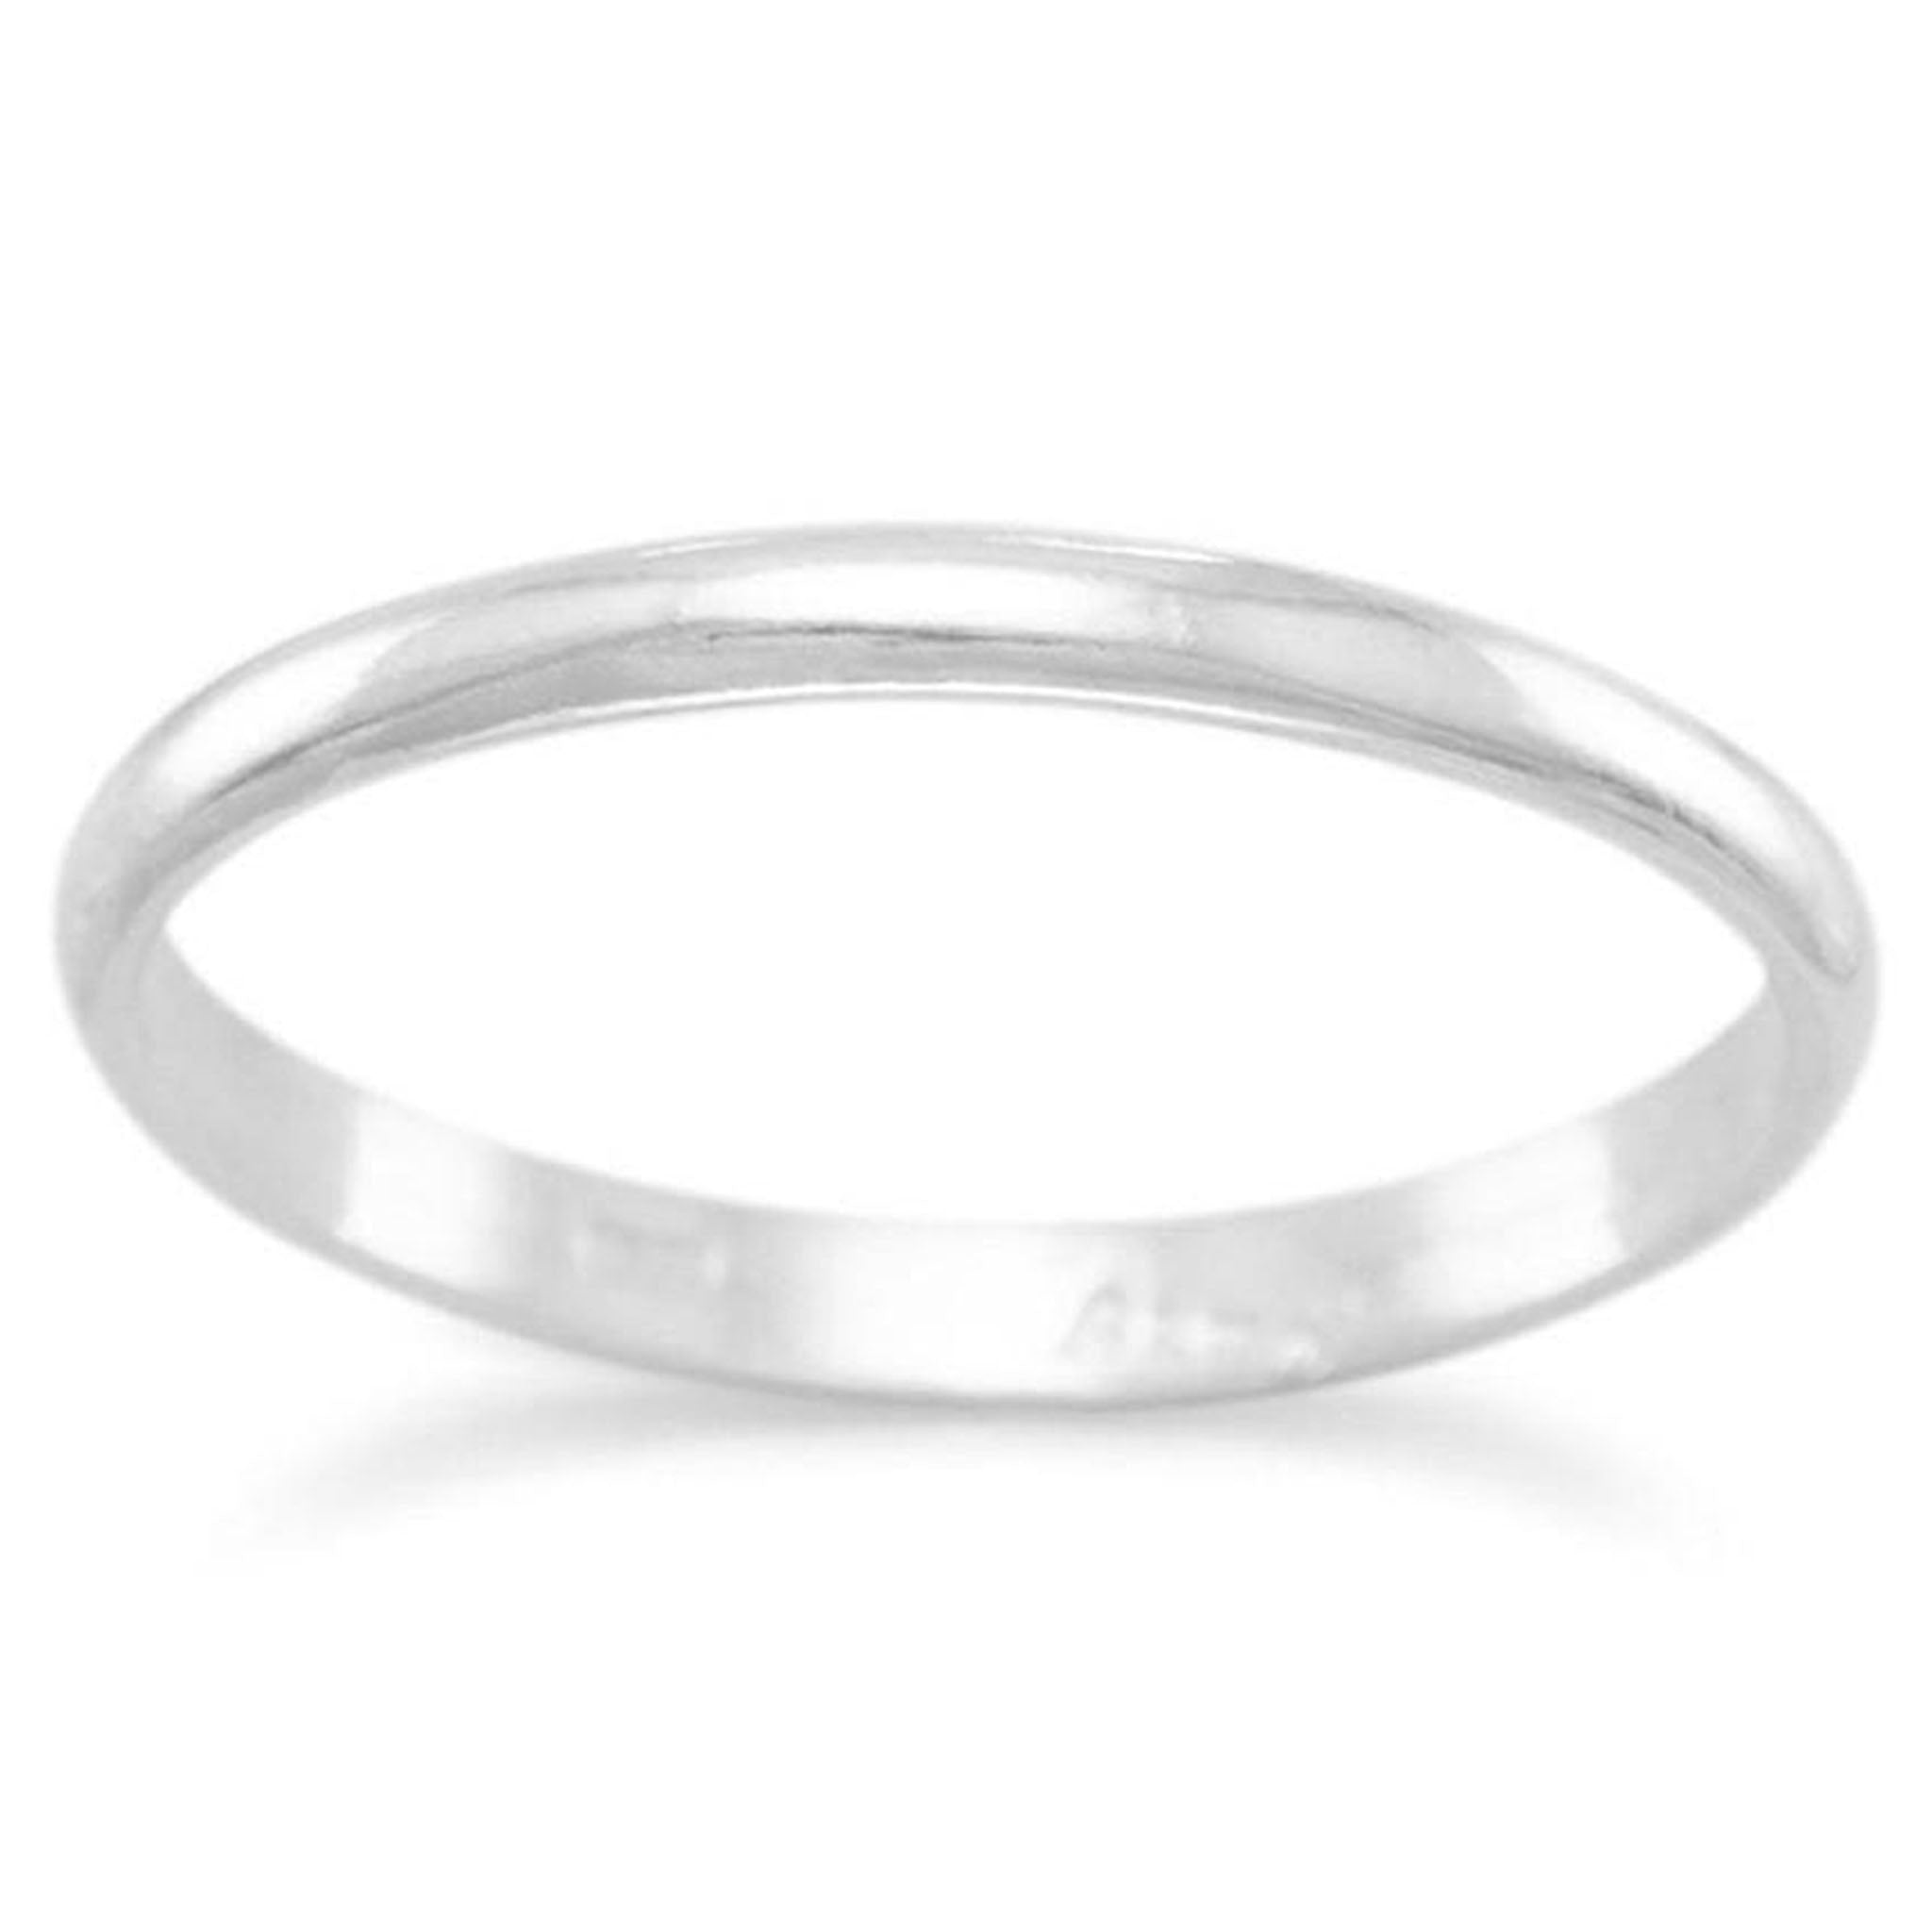 2mm Rounded Wedding Band Ring